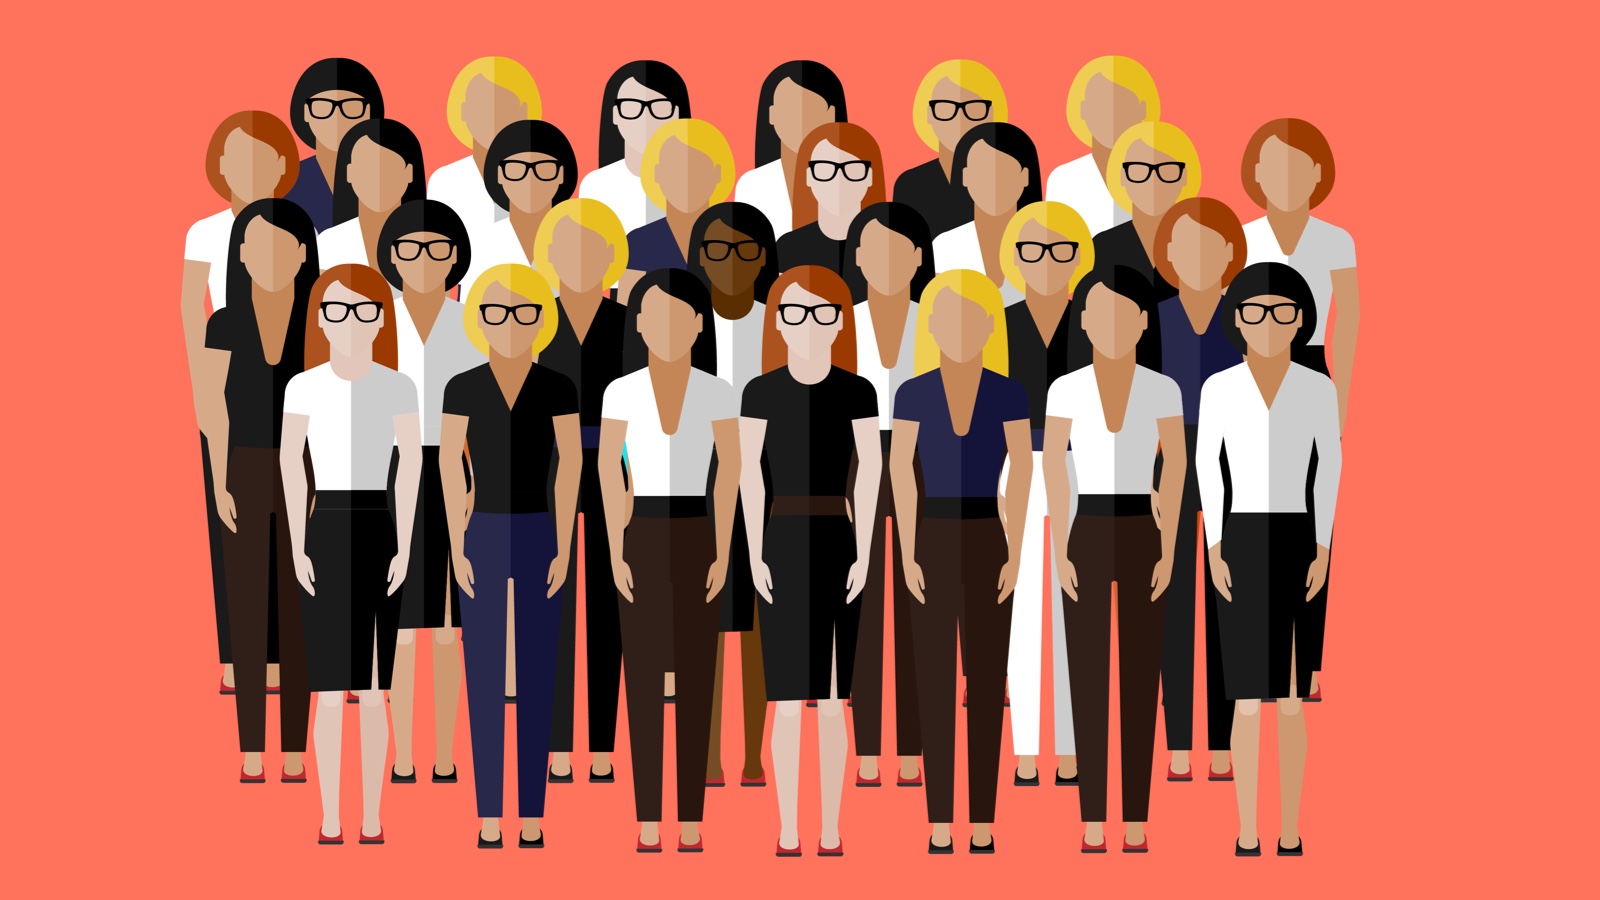 Women Building a Community in IT at the University of California